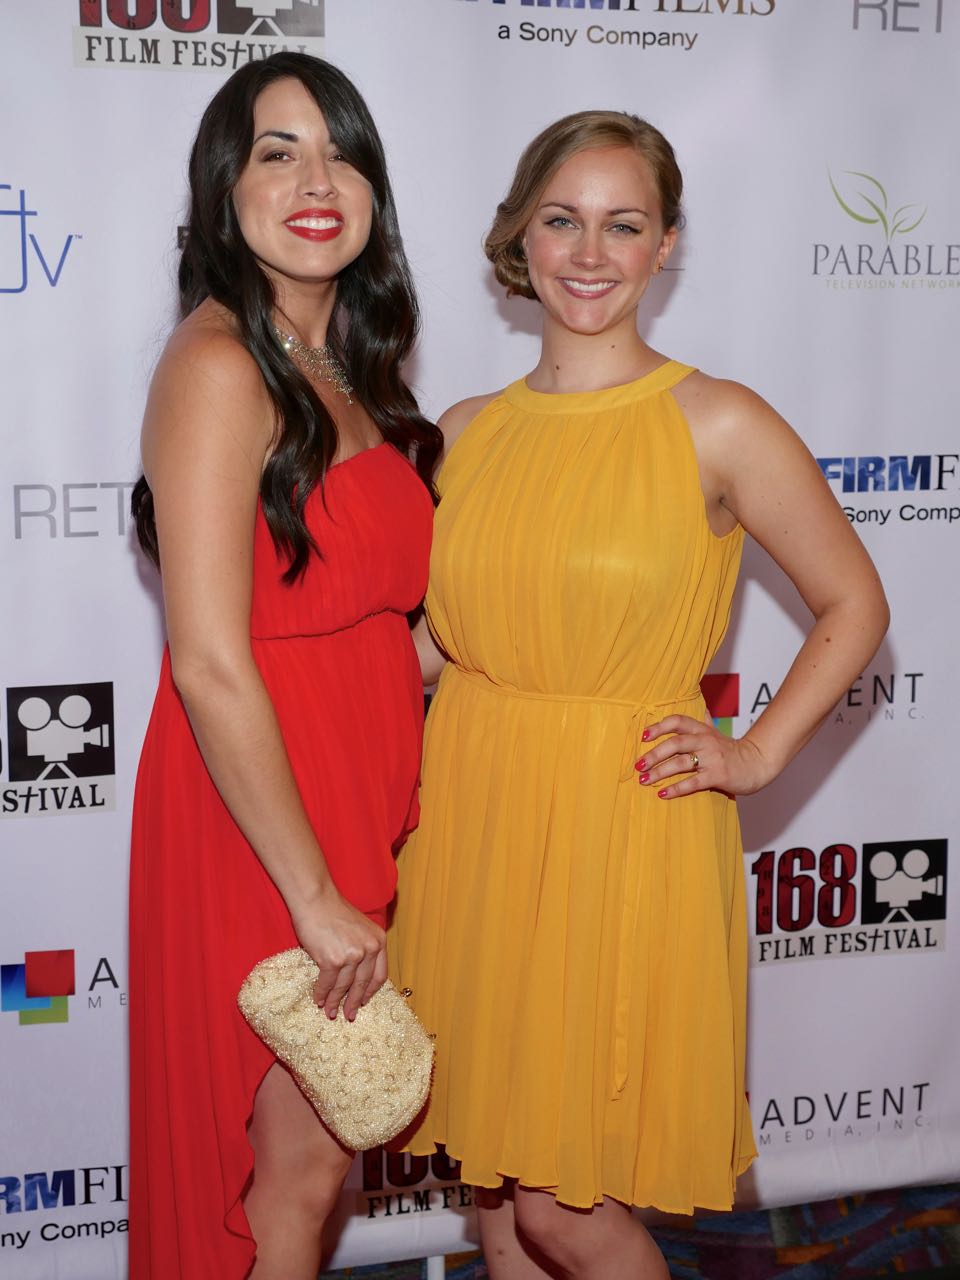 Cinthia Bolden and Marianne Haaland walking the red carpet at the 168 Film Festival. Both Cinthia and Marianne were nominated for awards at the festival.